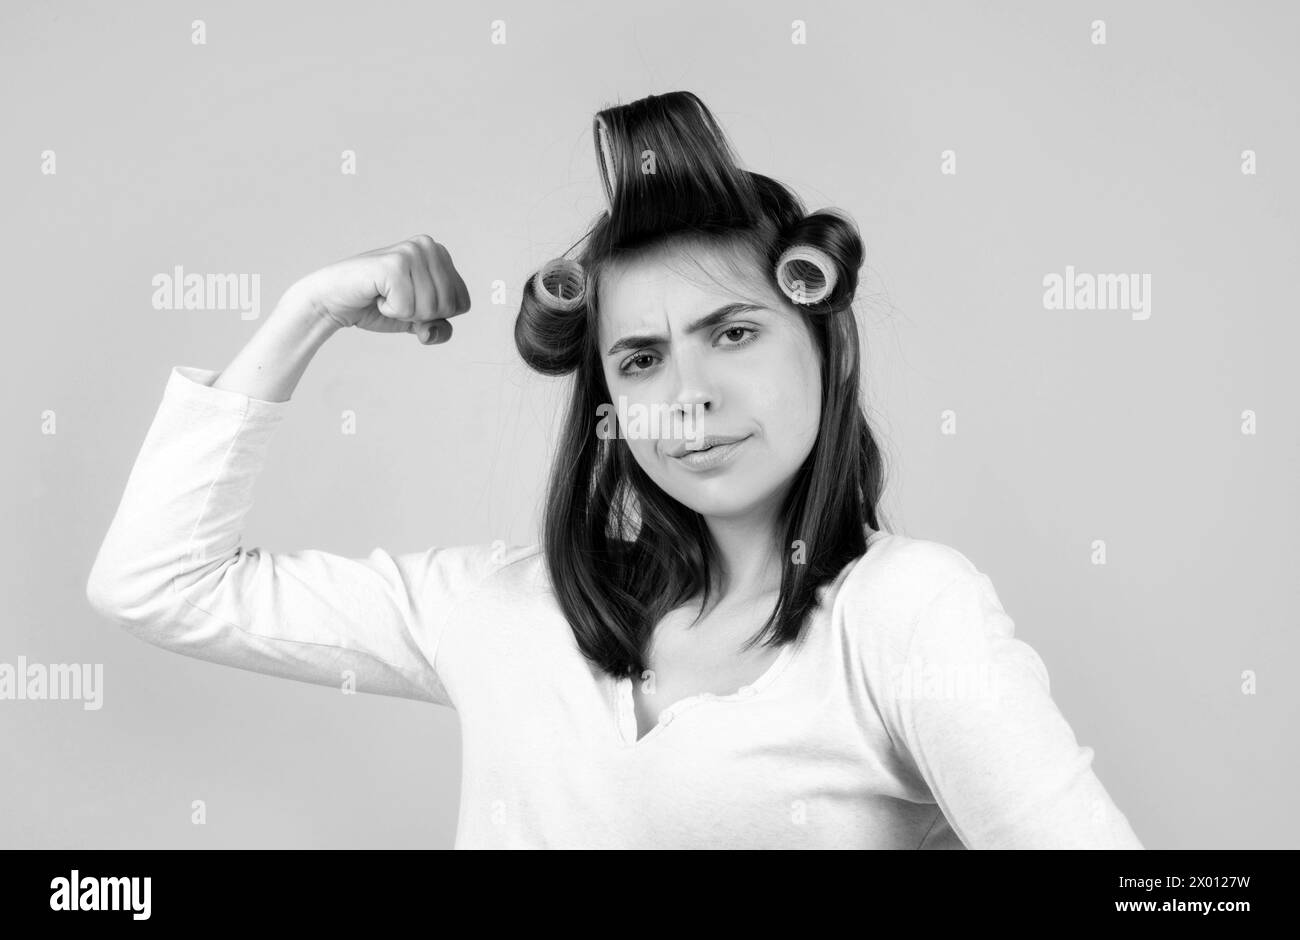 Woman with curlers. Funny housewife power. Pretty woman with curlers in her hair shows her strength and confidence. Stock Photo